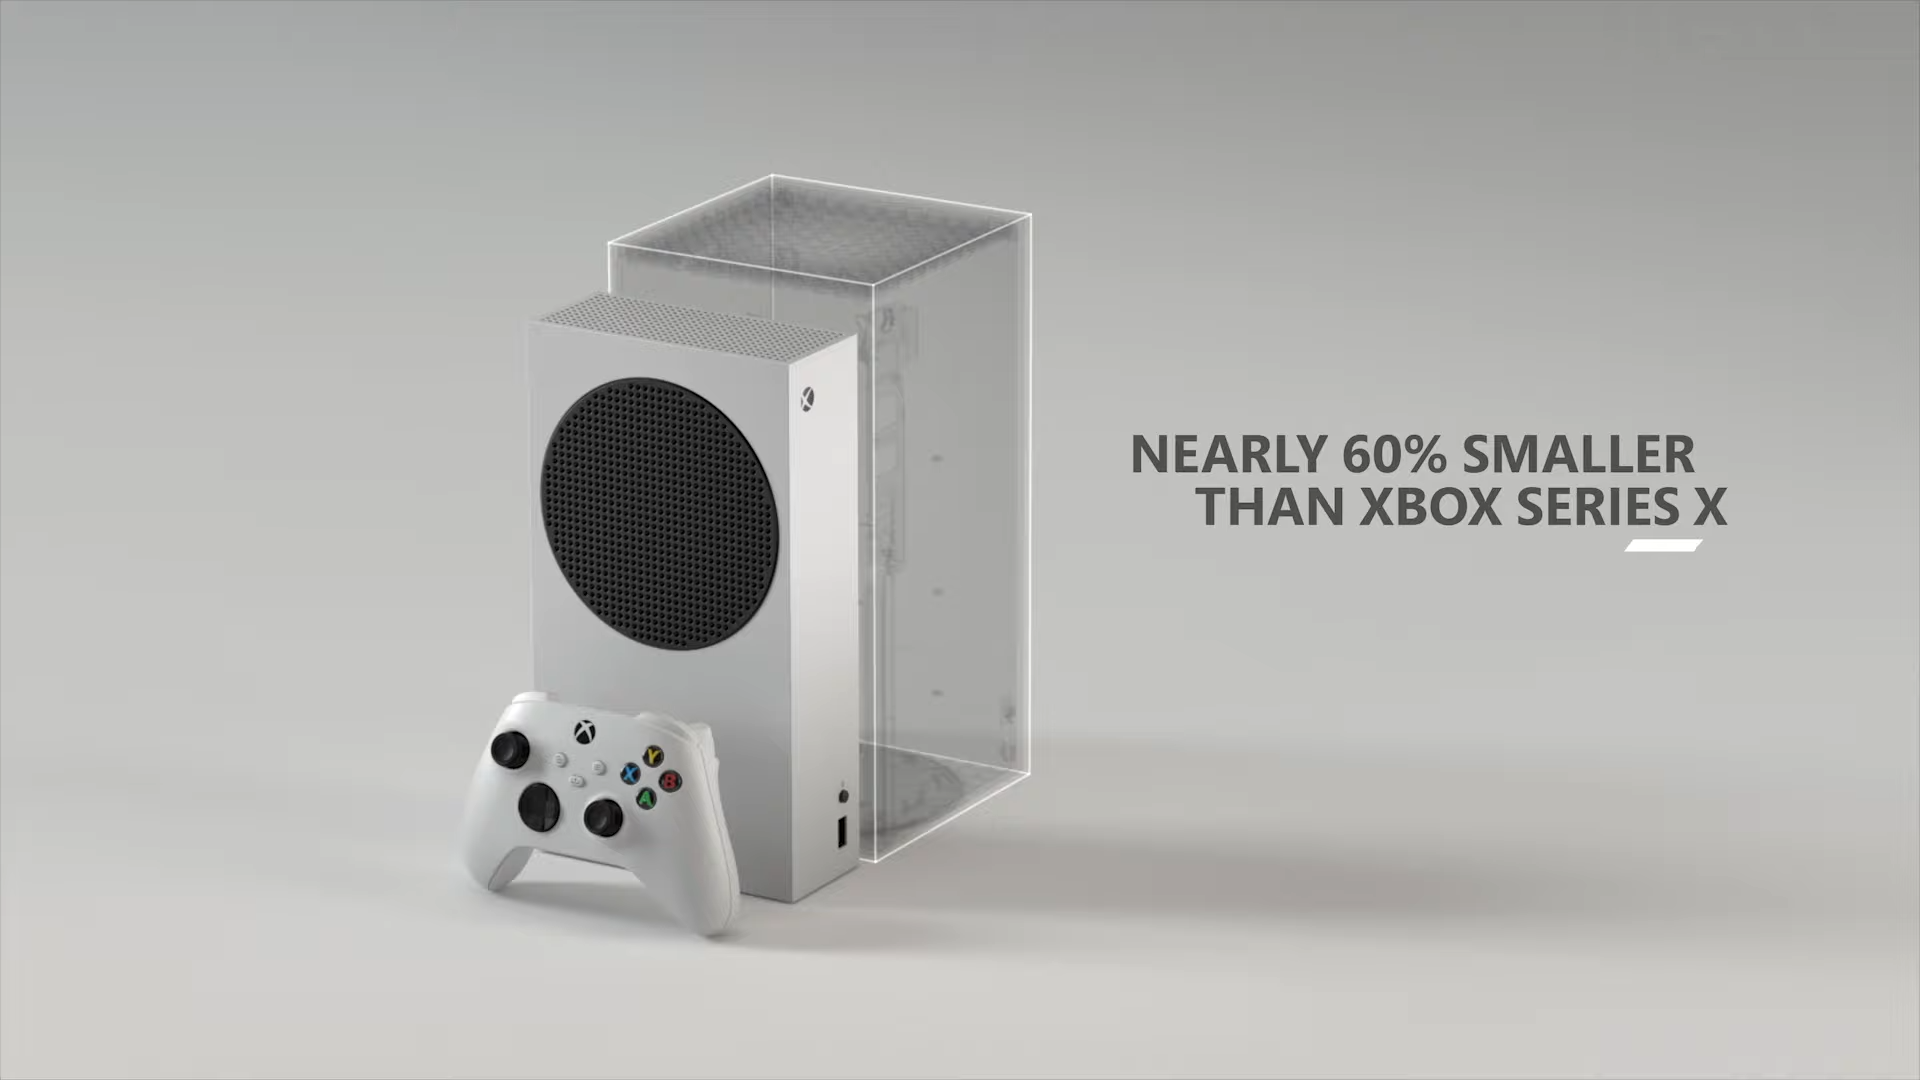 Xbox Series SはXbox One Xよりも強力？一長一短なメリットとデメリット。 - WPTeq